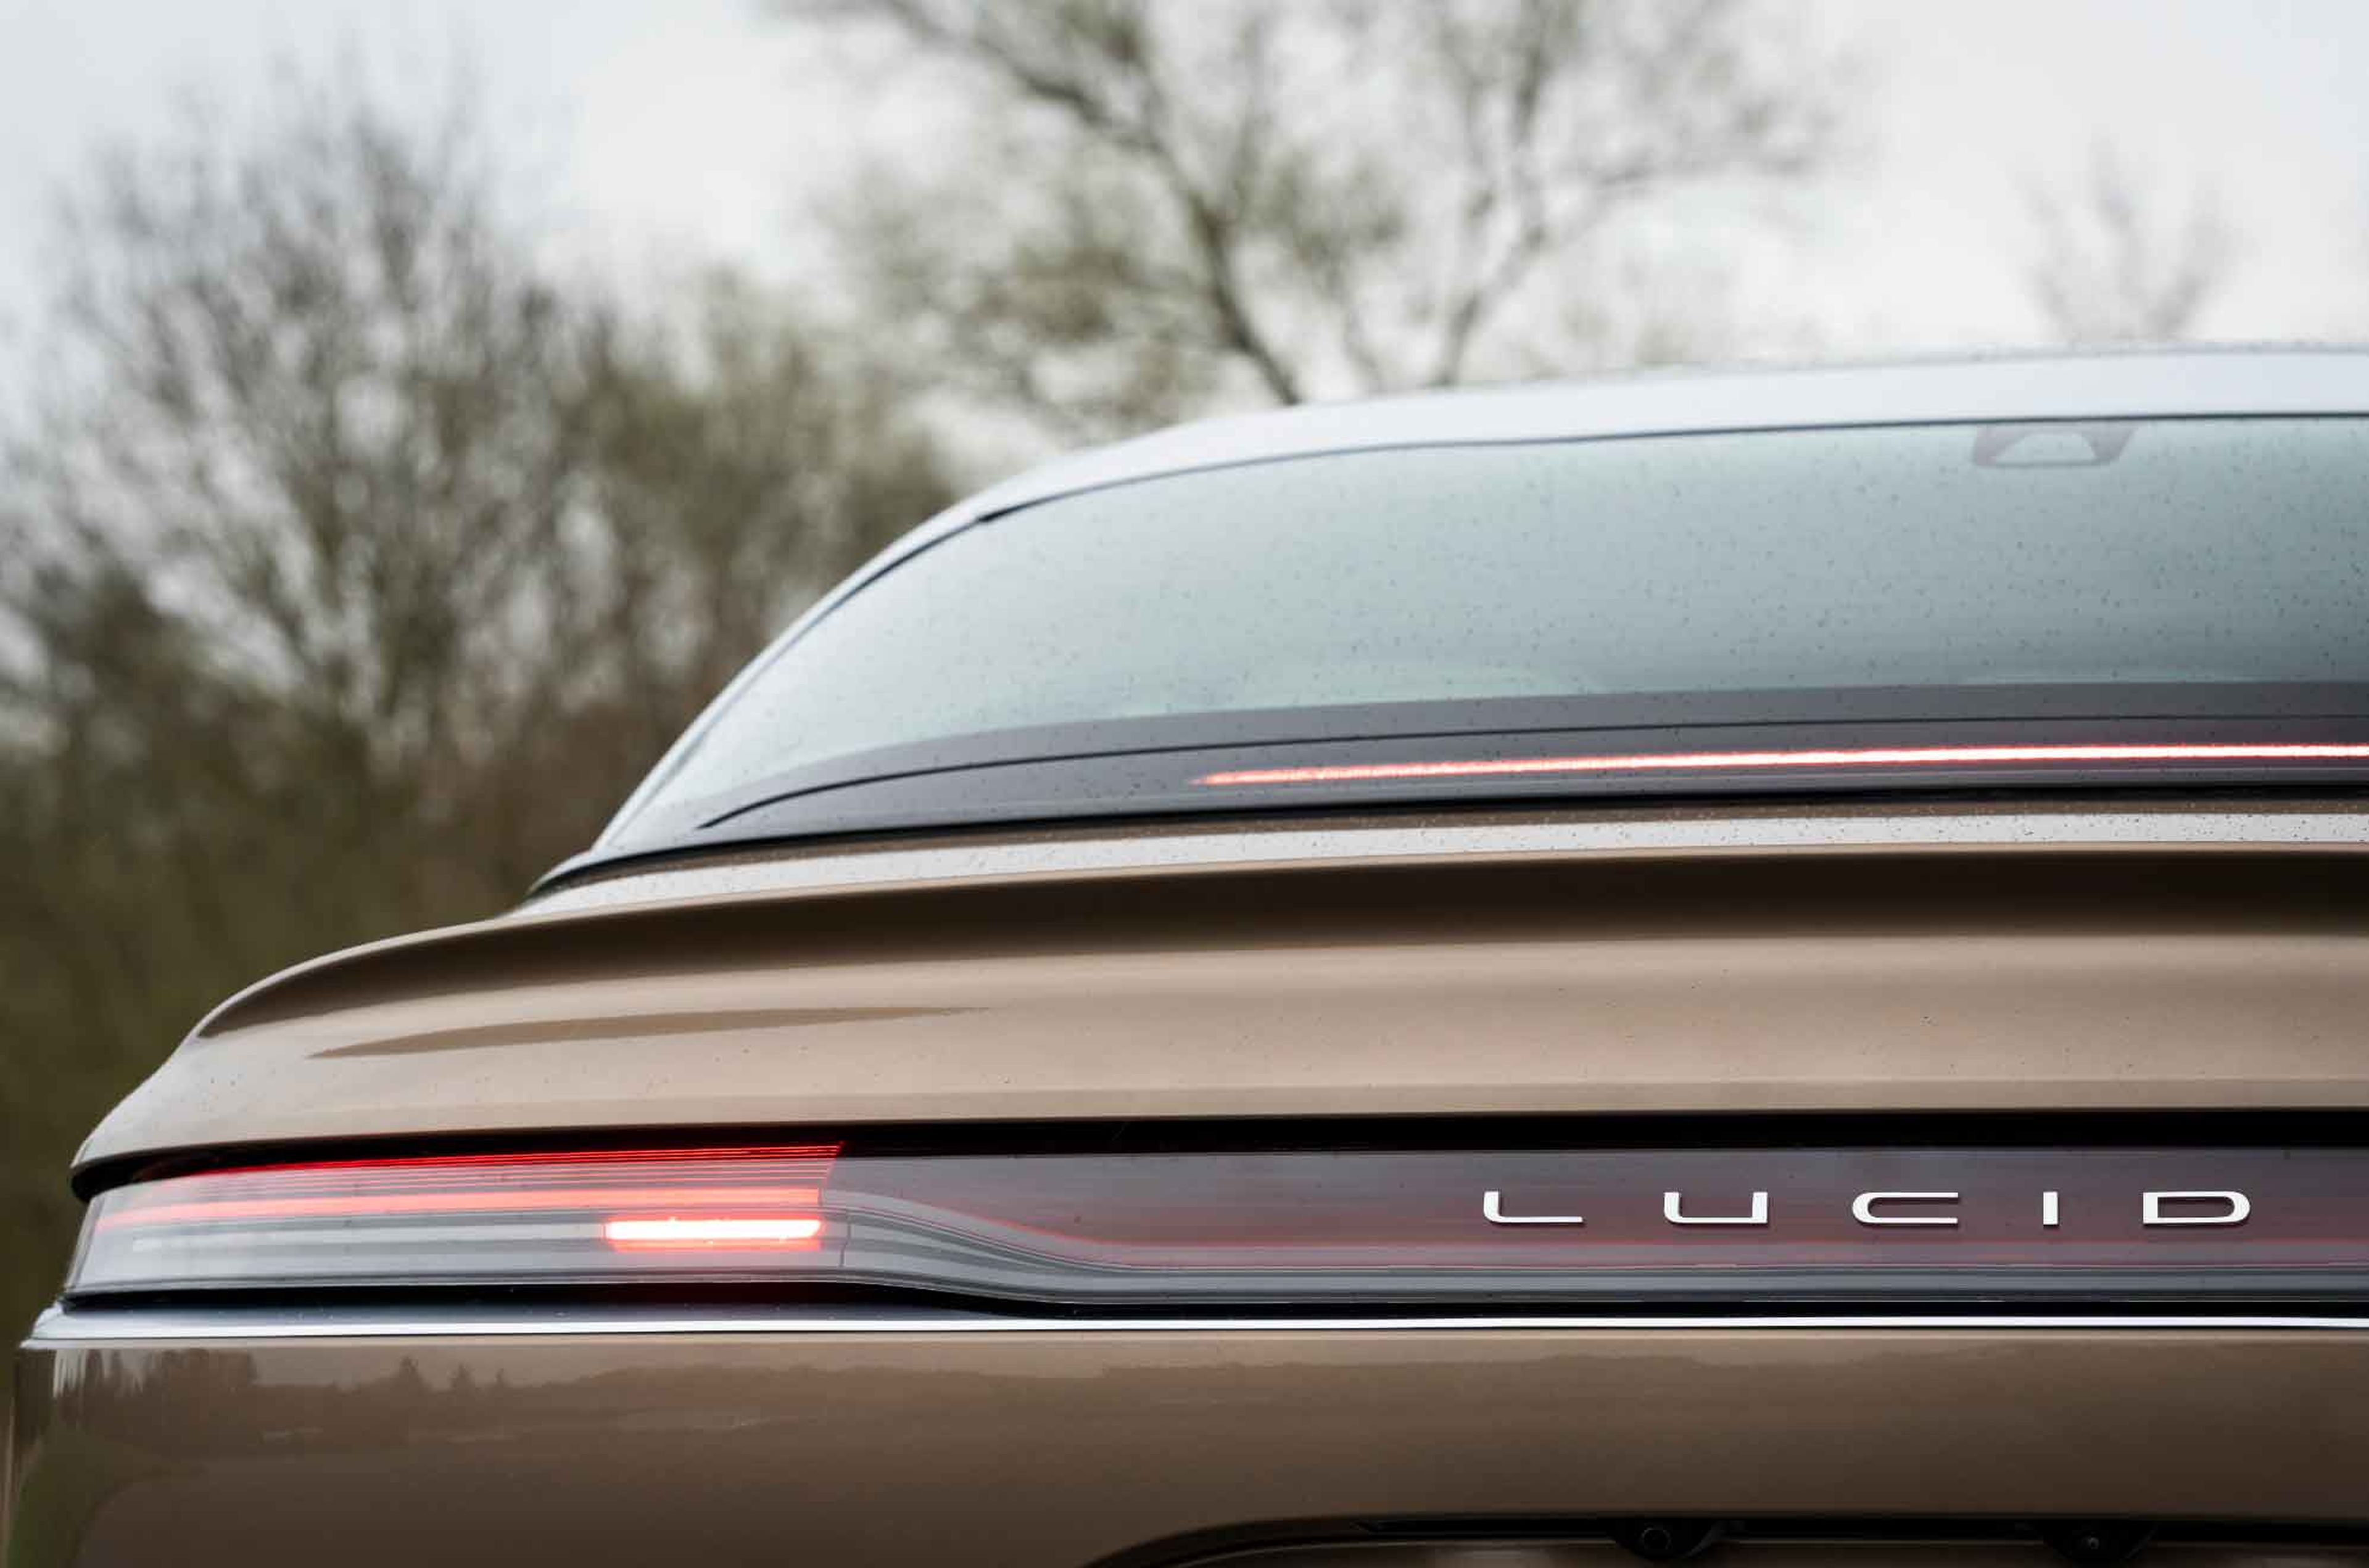 Test of the Lucid Air rear